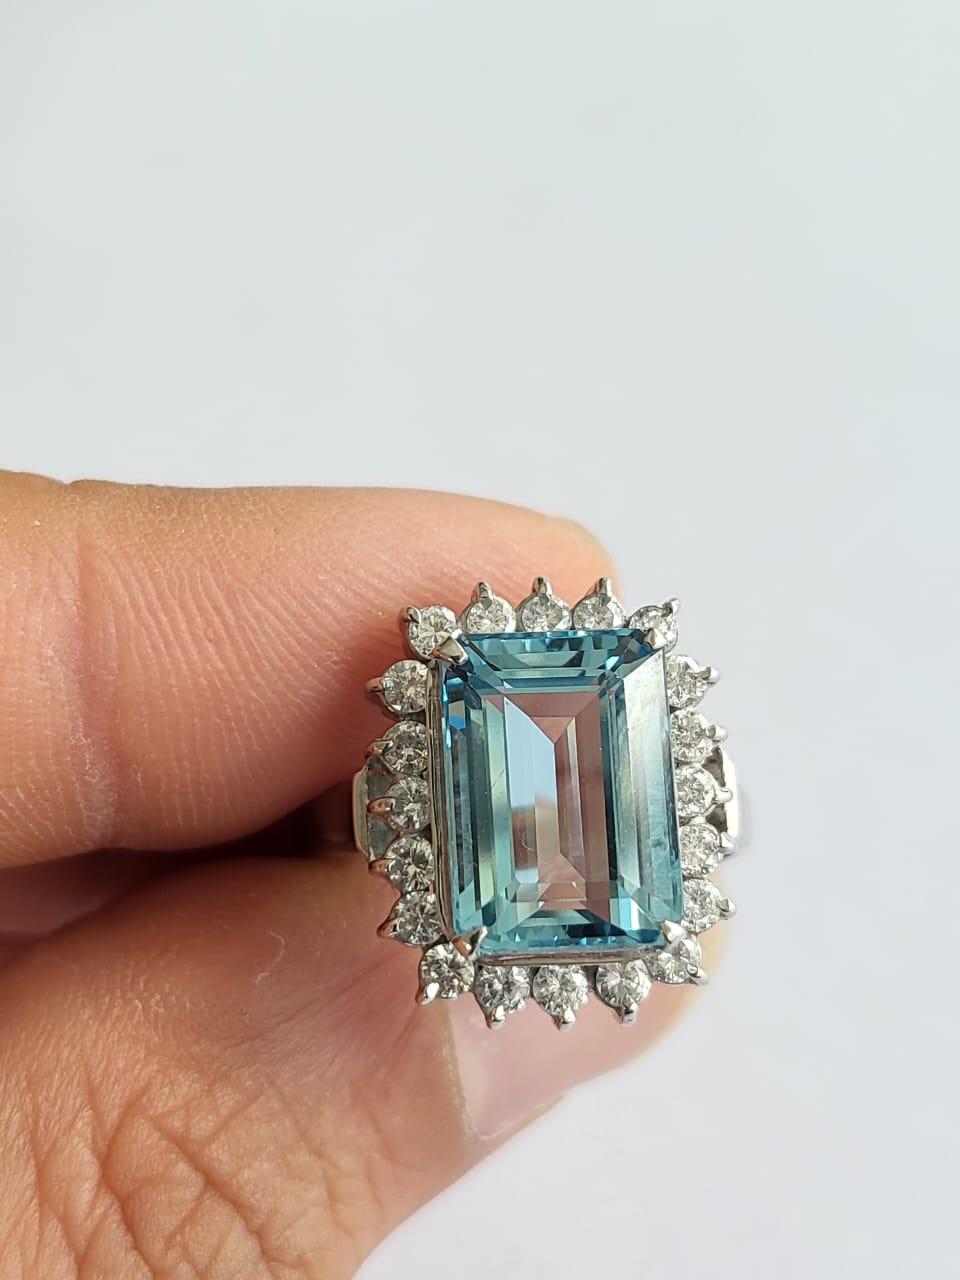 A very gorgeous and classical, Aquamarine Engagement / Wedding Ring set in Platinum 900 & Diamonds. The weight of the Emerald Cut Aquamarine is 4.69 carats. The weight of the Diamonds is 0.69 carats. Net Platinum weight is 7.02 grams. The dimensions